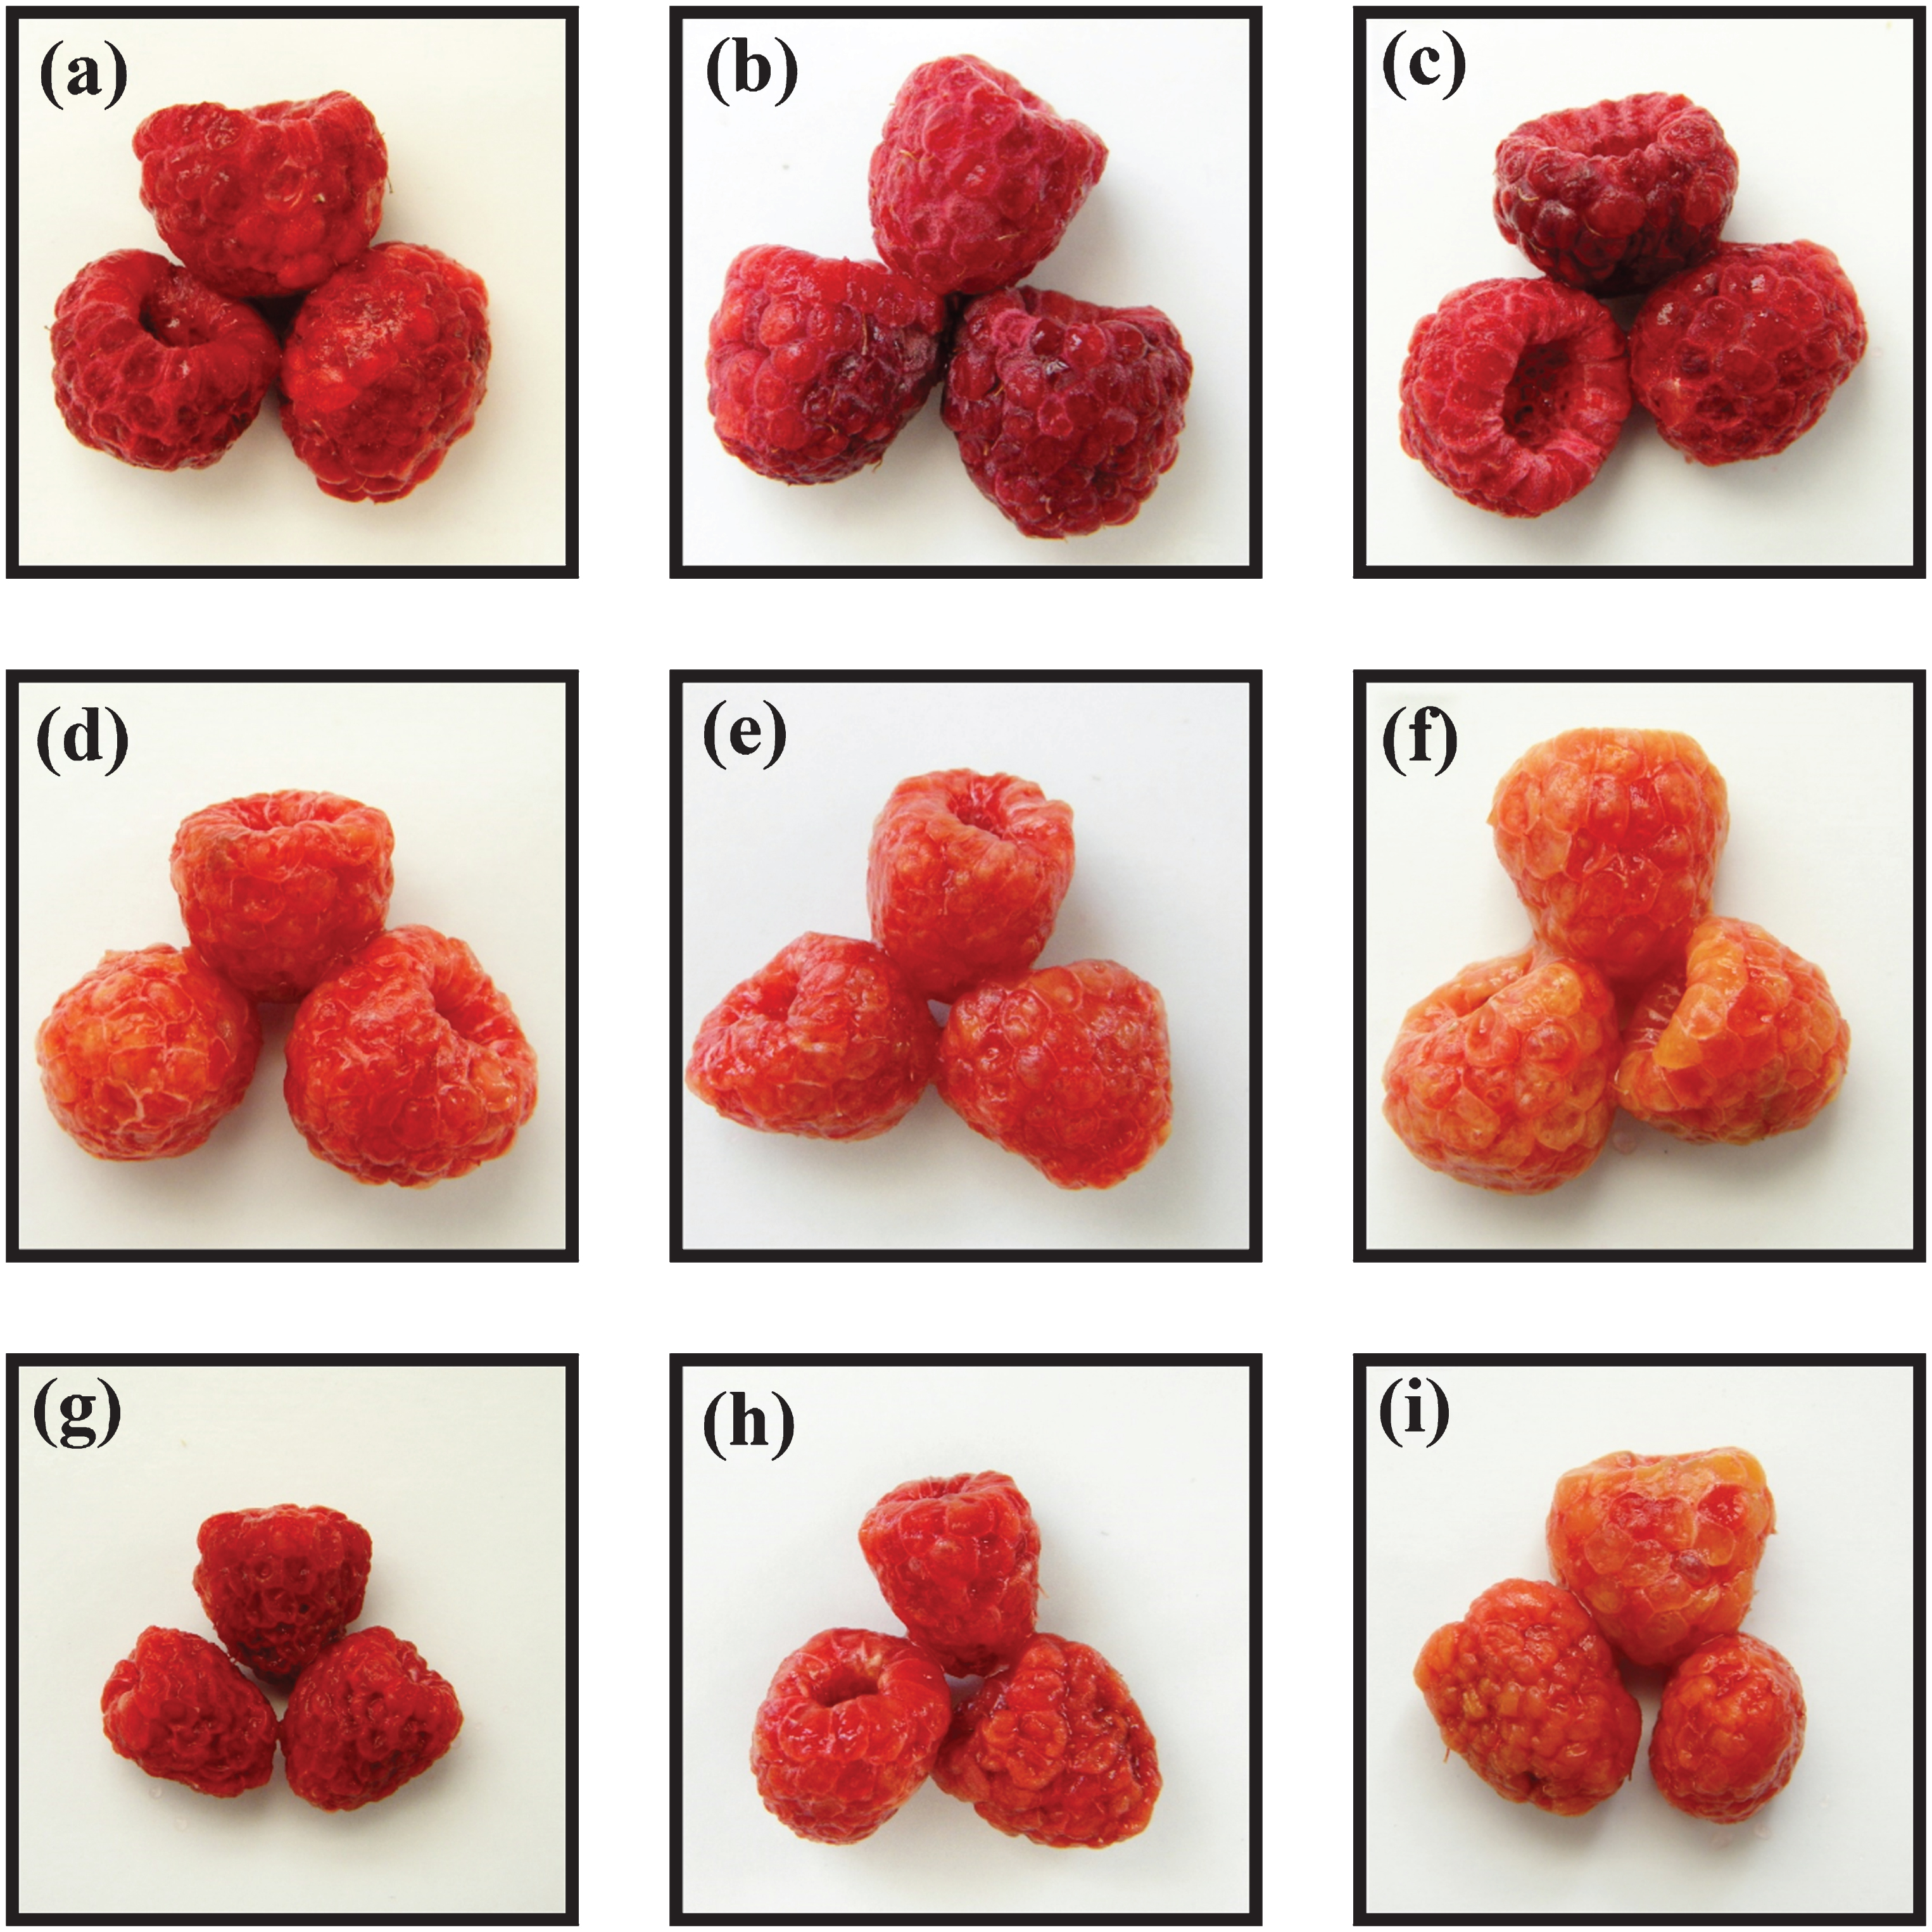 Images obtained after rehydration at 25°C of freeze-dried raspberries at different values of rehydration time. Control (C): 5 min (a), 20 min (b) and final (c). Wet infusion (WI-BAC): 5 min (d), 20 min (e) and final (f). Dry infusion (DI-BAC): 5 min (g), 20 min (h) and final (i).